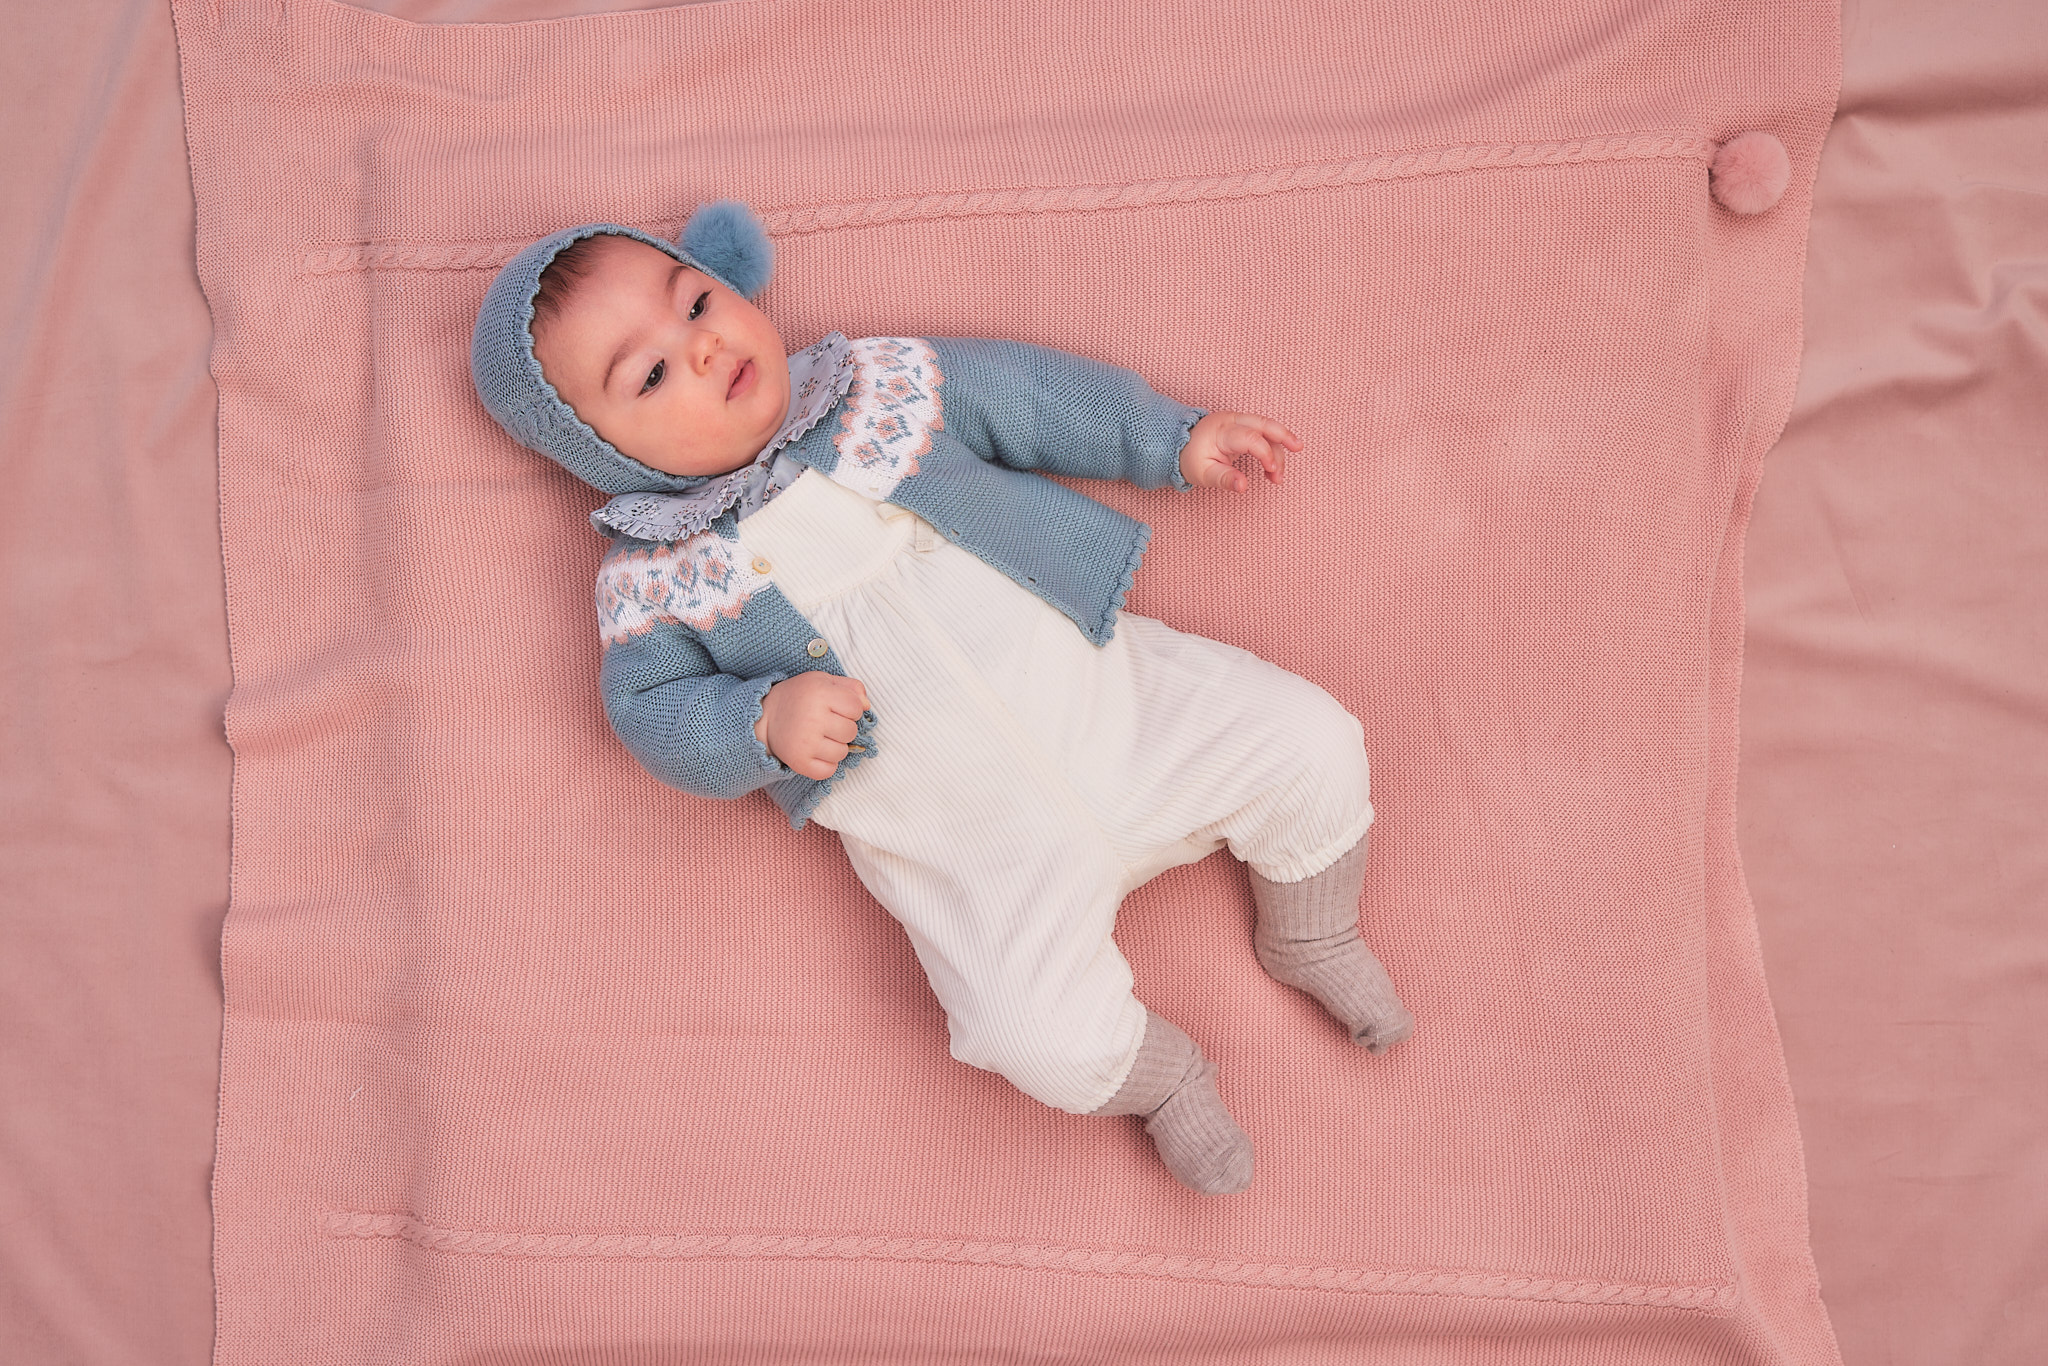 FINA baby dress in baby clothes on pink blanket